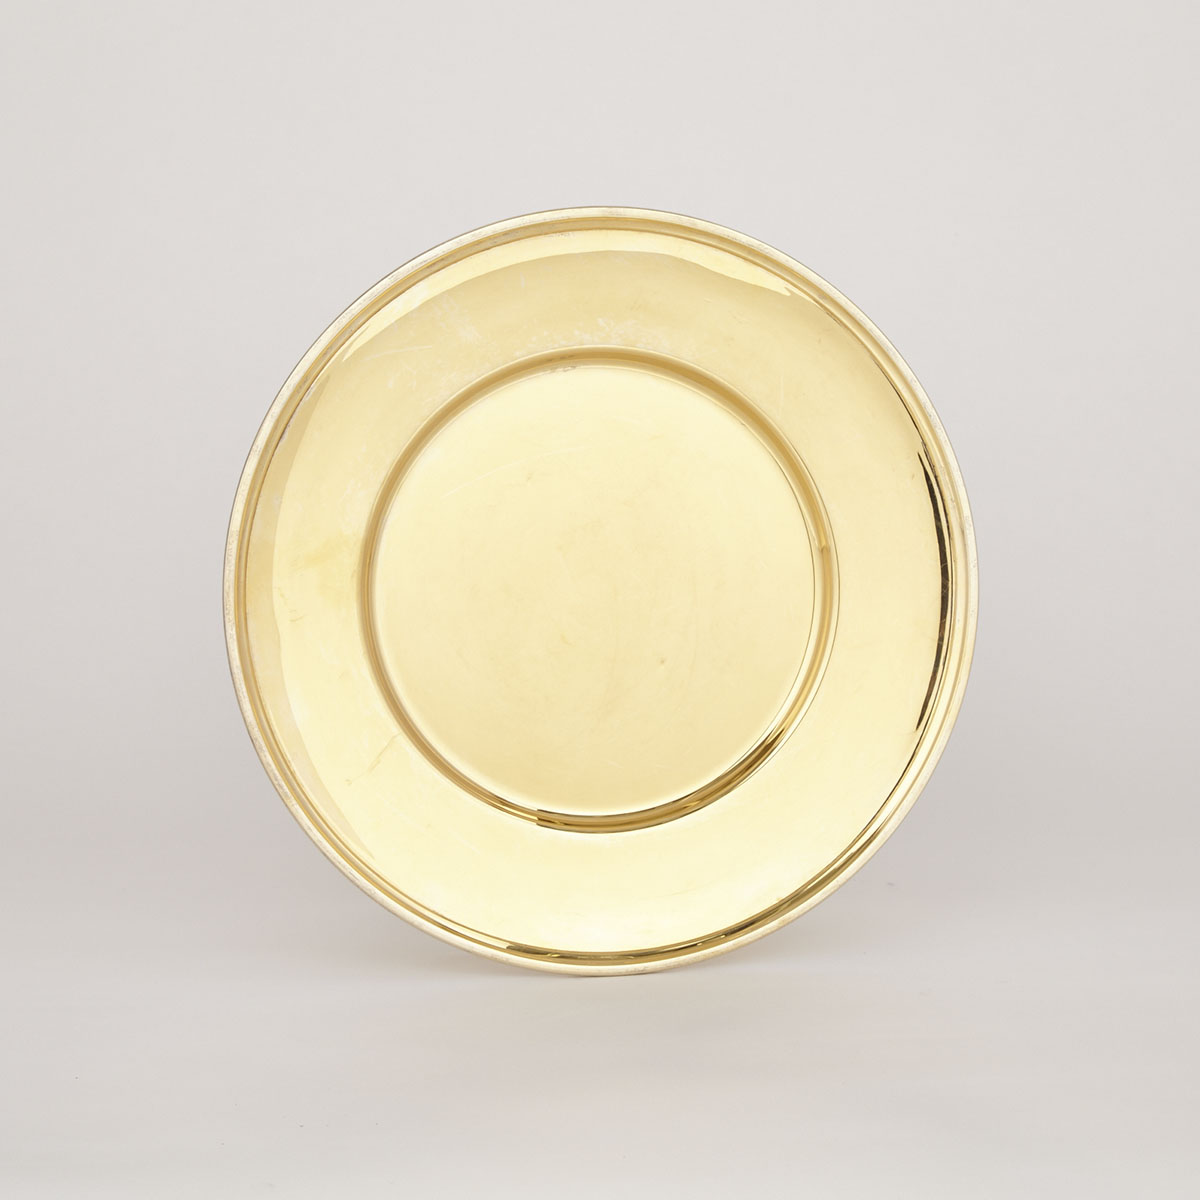 Canadian Silver-Gilt Cake Plate, Henry Birks & Sons, Montreal, Que., 1964